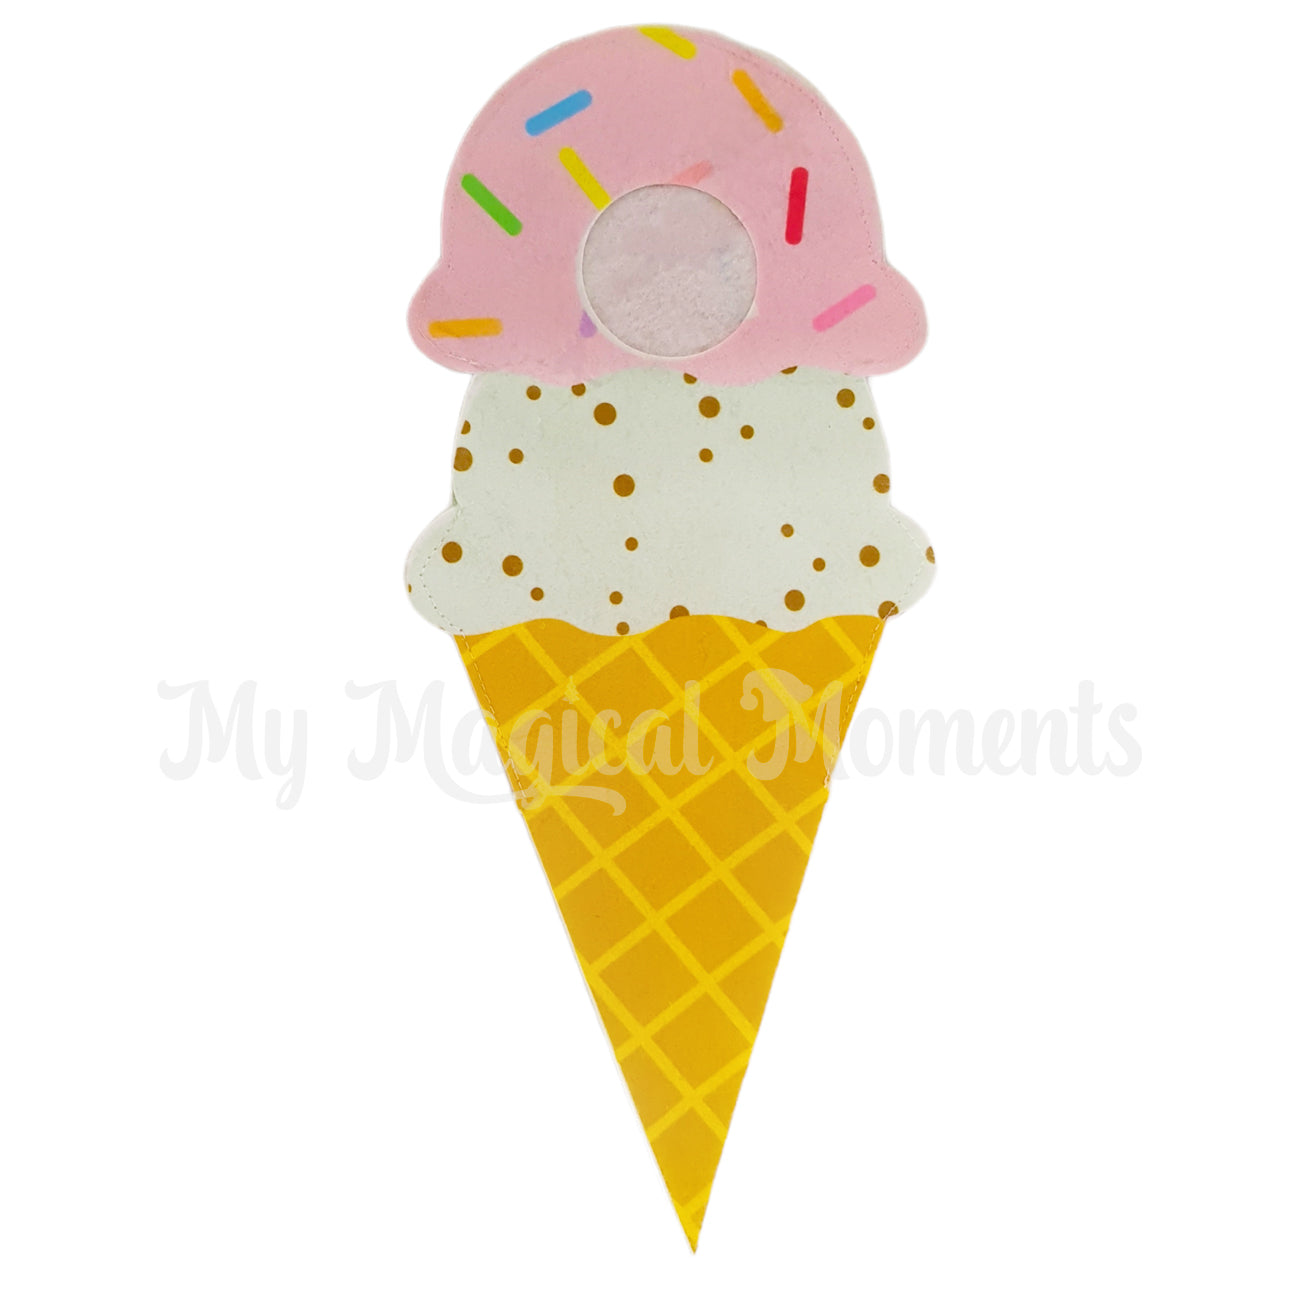 Ice cream elf costume, Two scoops one strawberry with sprinkles the second is mint choc chip on a cone